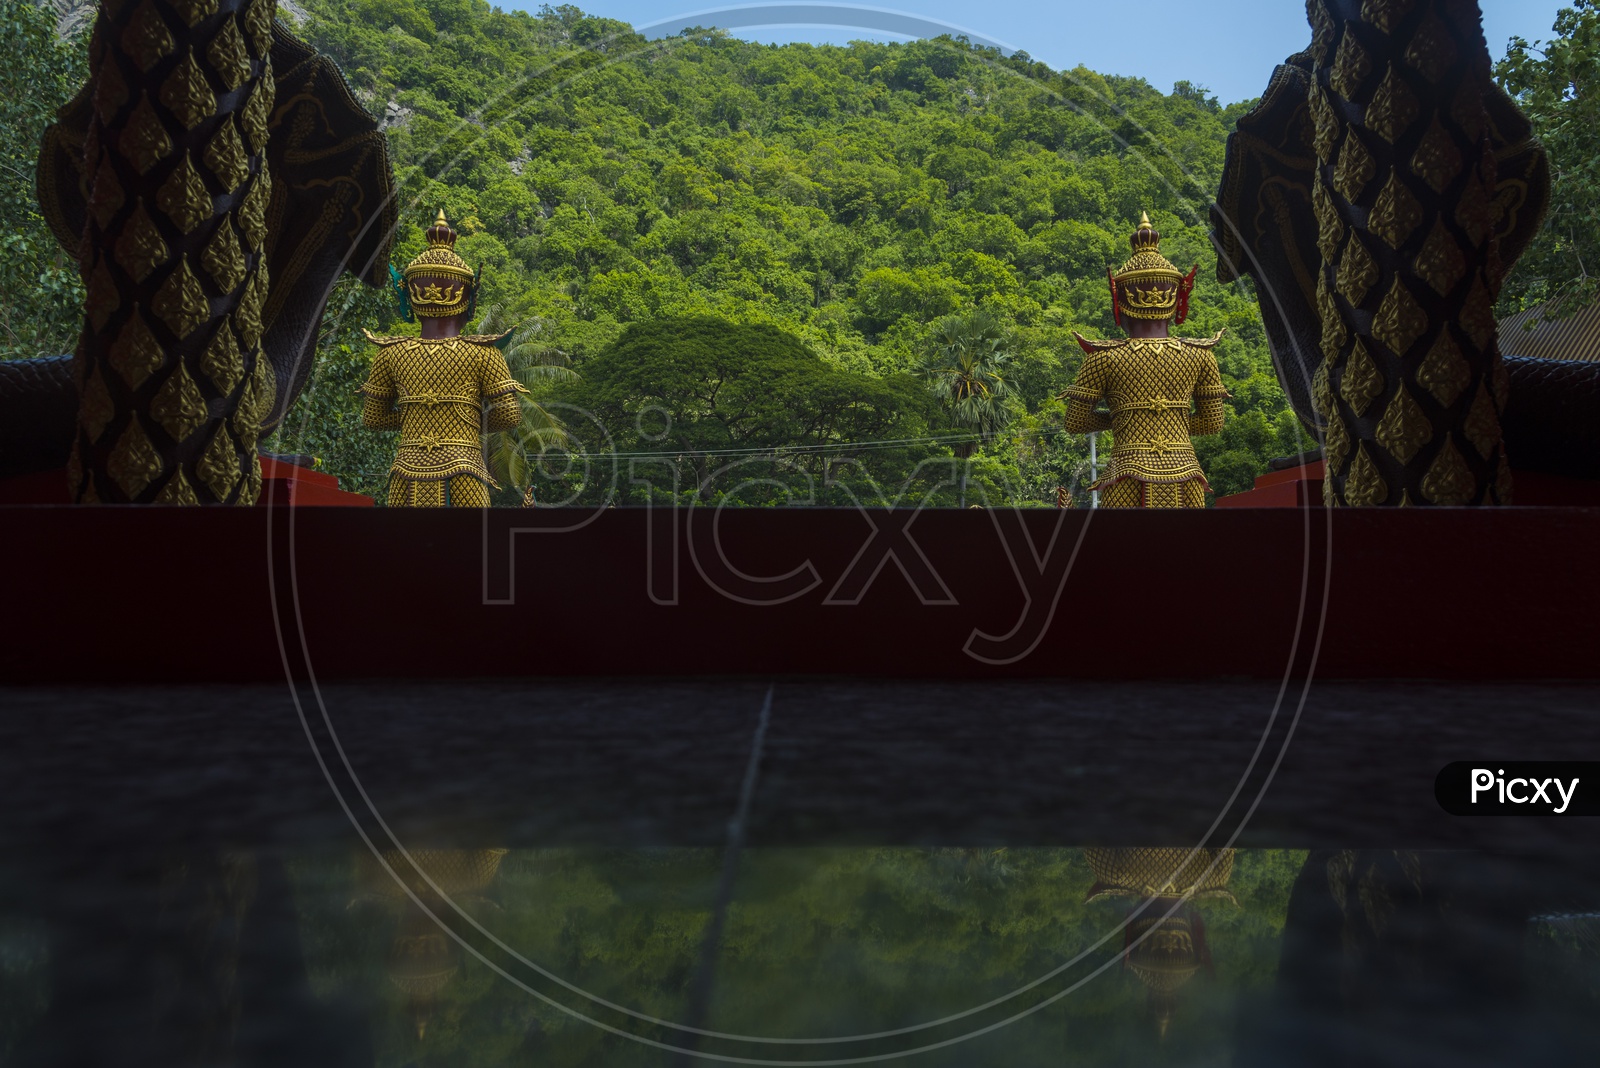 View of Statues in Thai temple